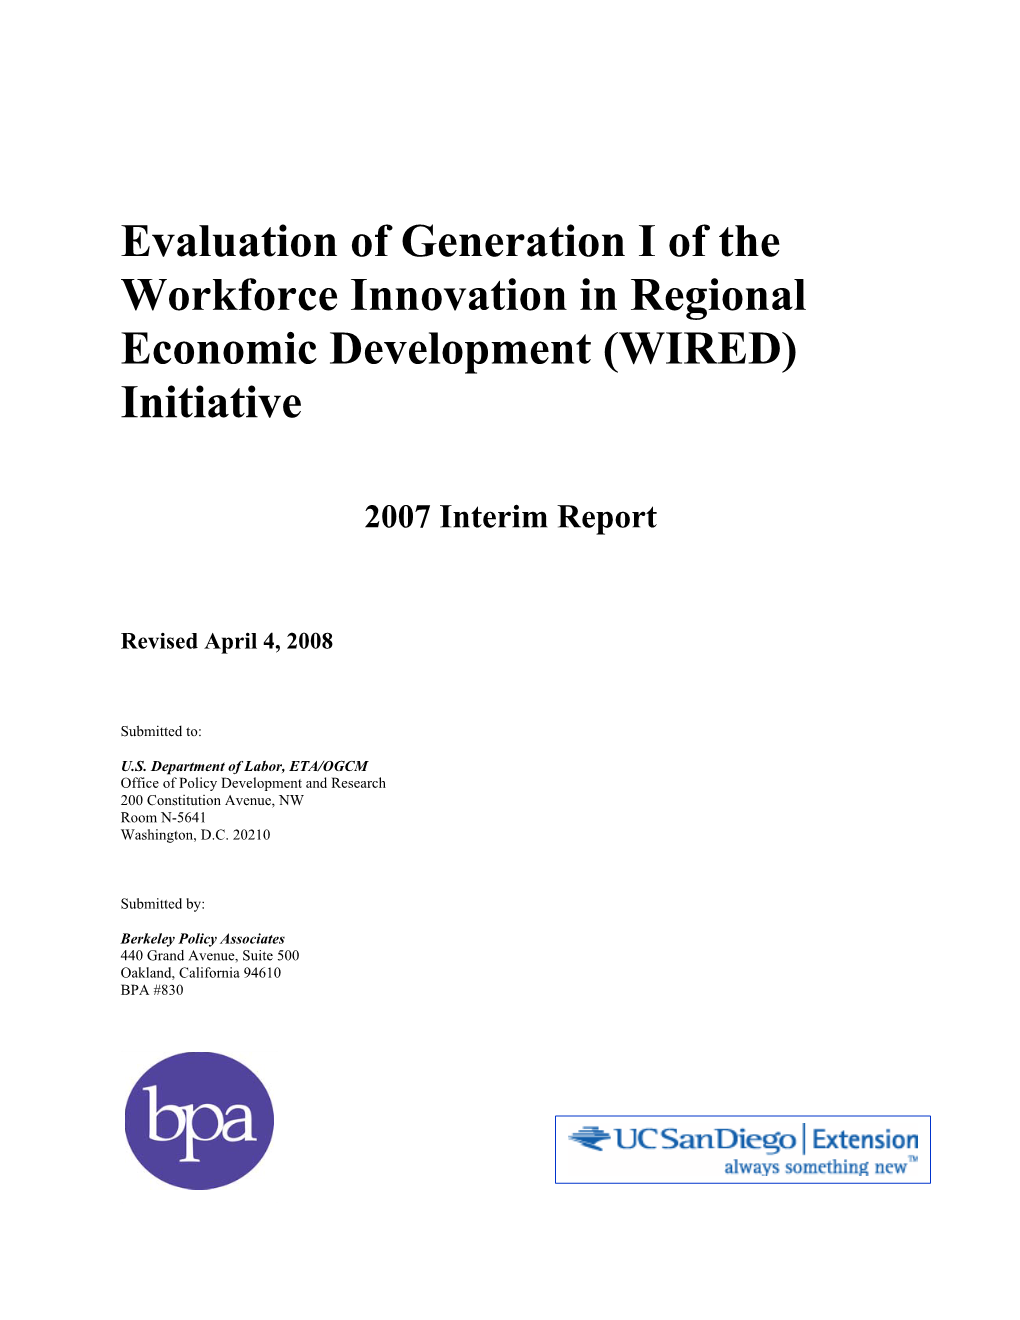 Evaluation of Generation I of the Workforce Innovation in Regional Economic Development (WIRED) Initiative